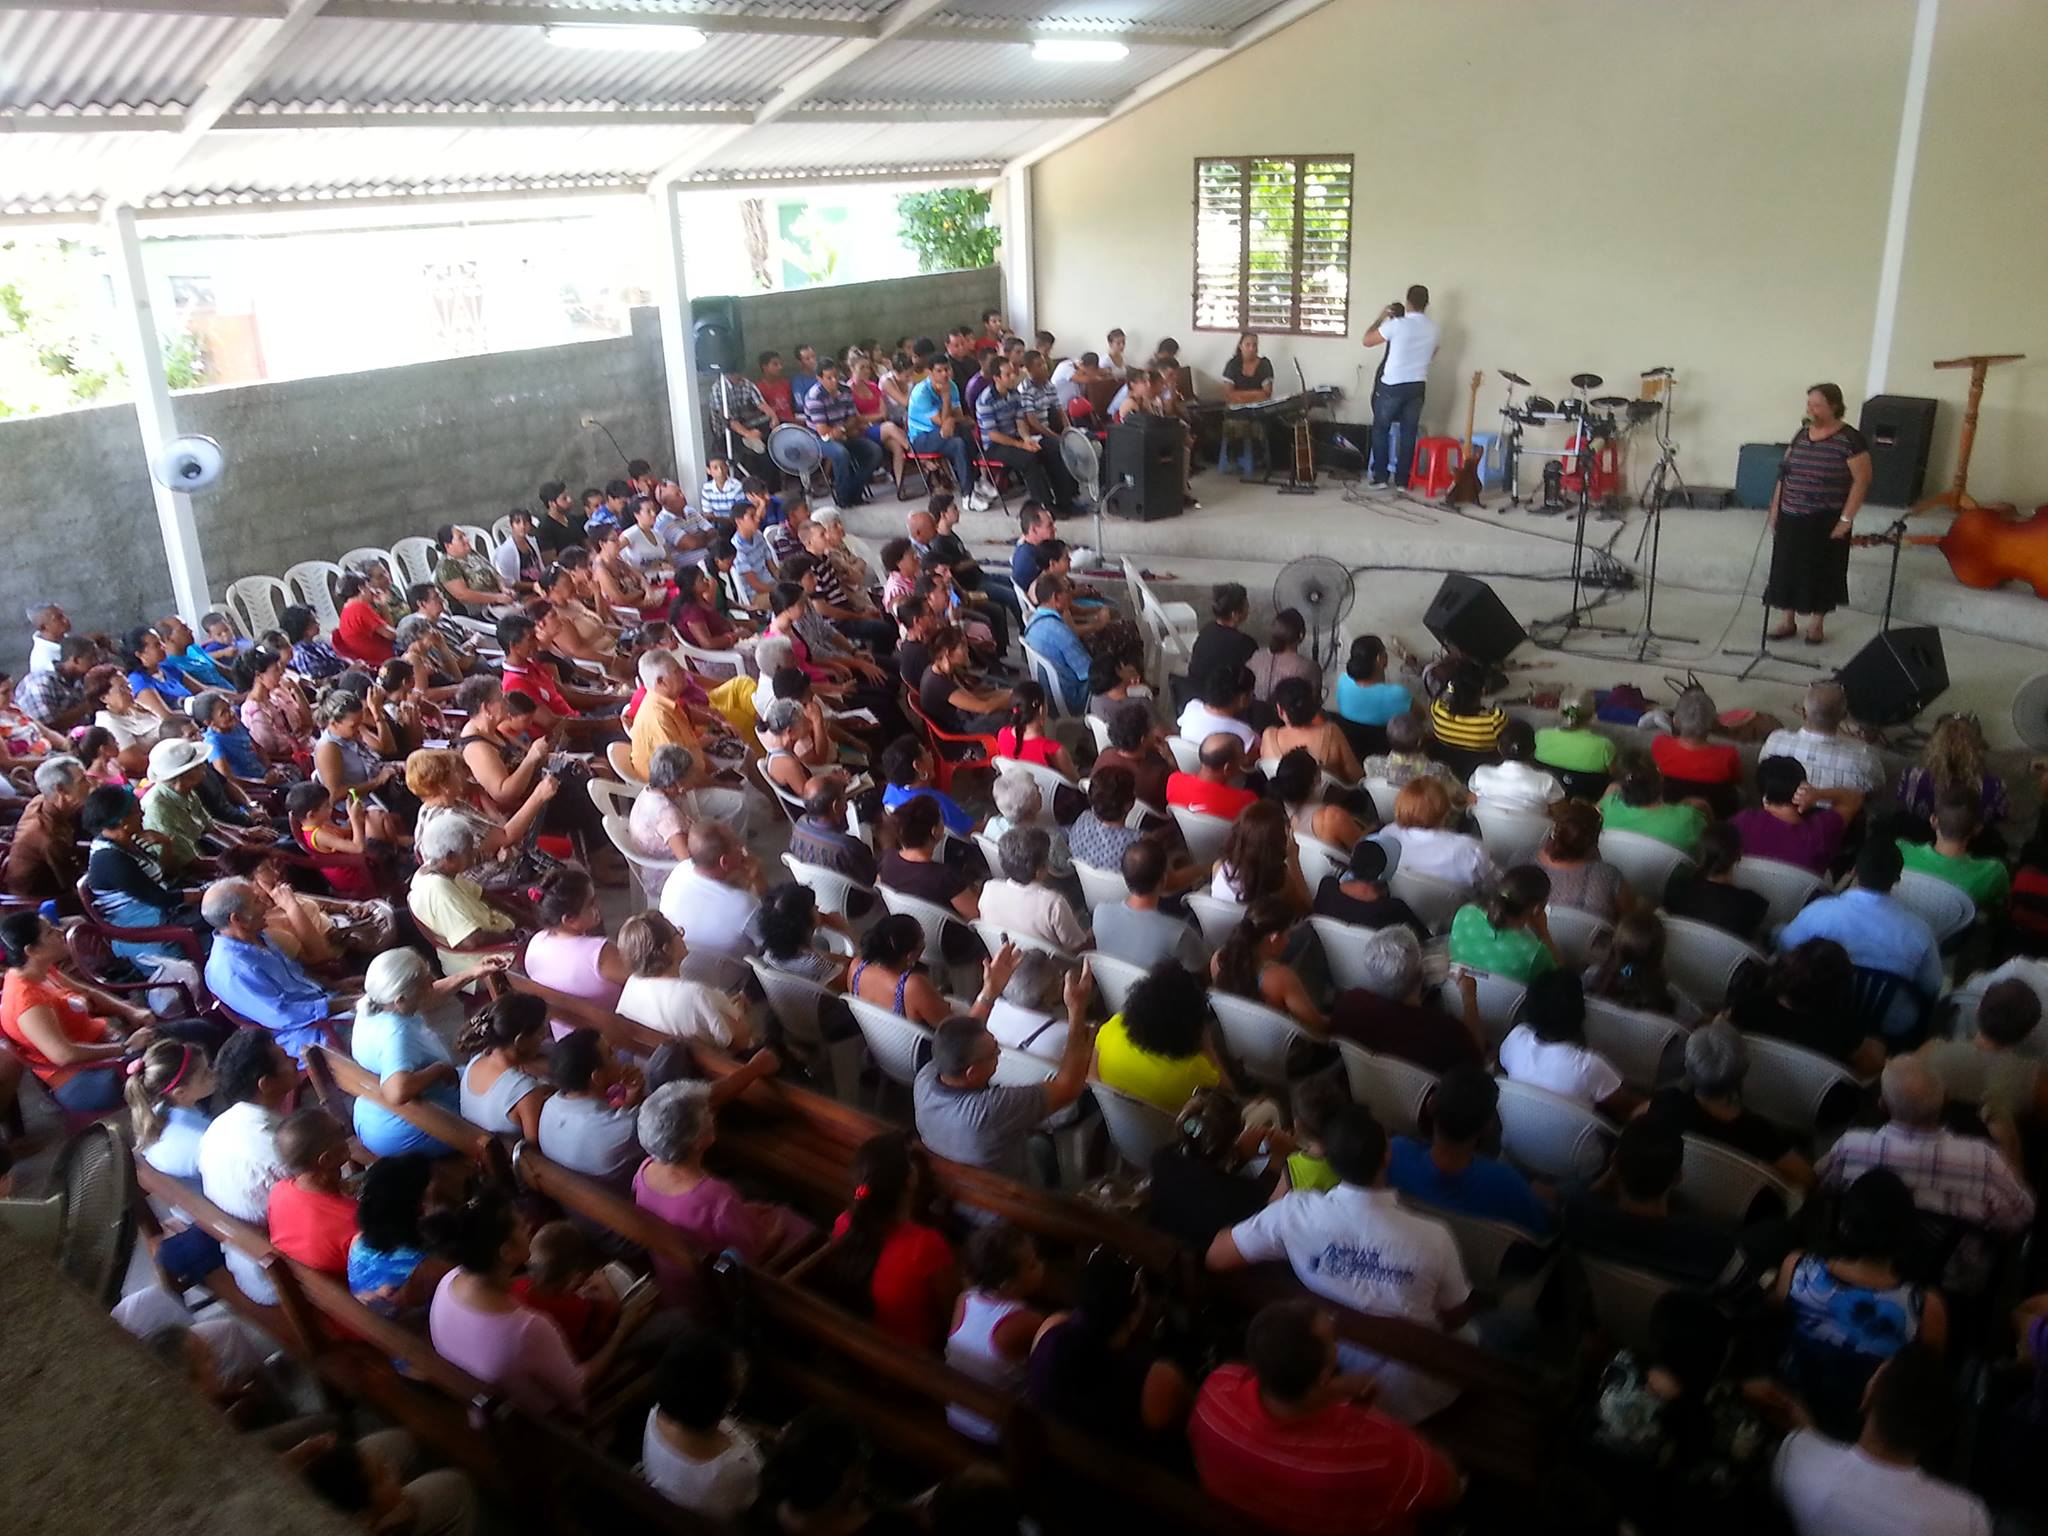 CUBA | NOV. 8, 2021 — Government Prohibits Church from Meeting